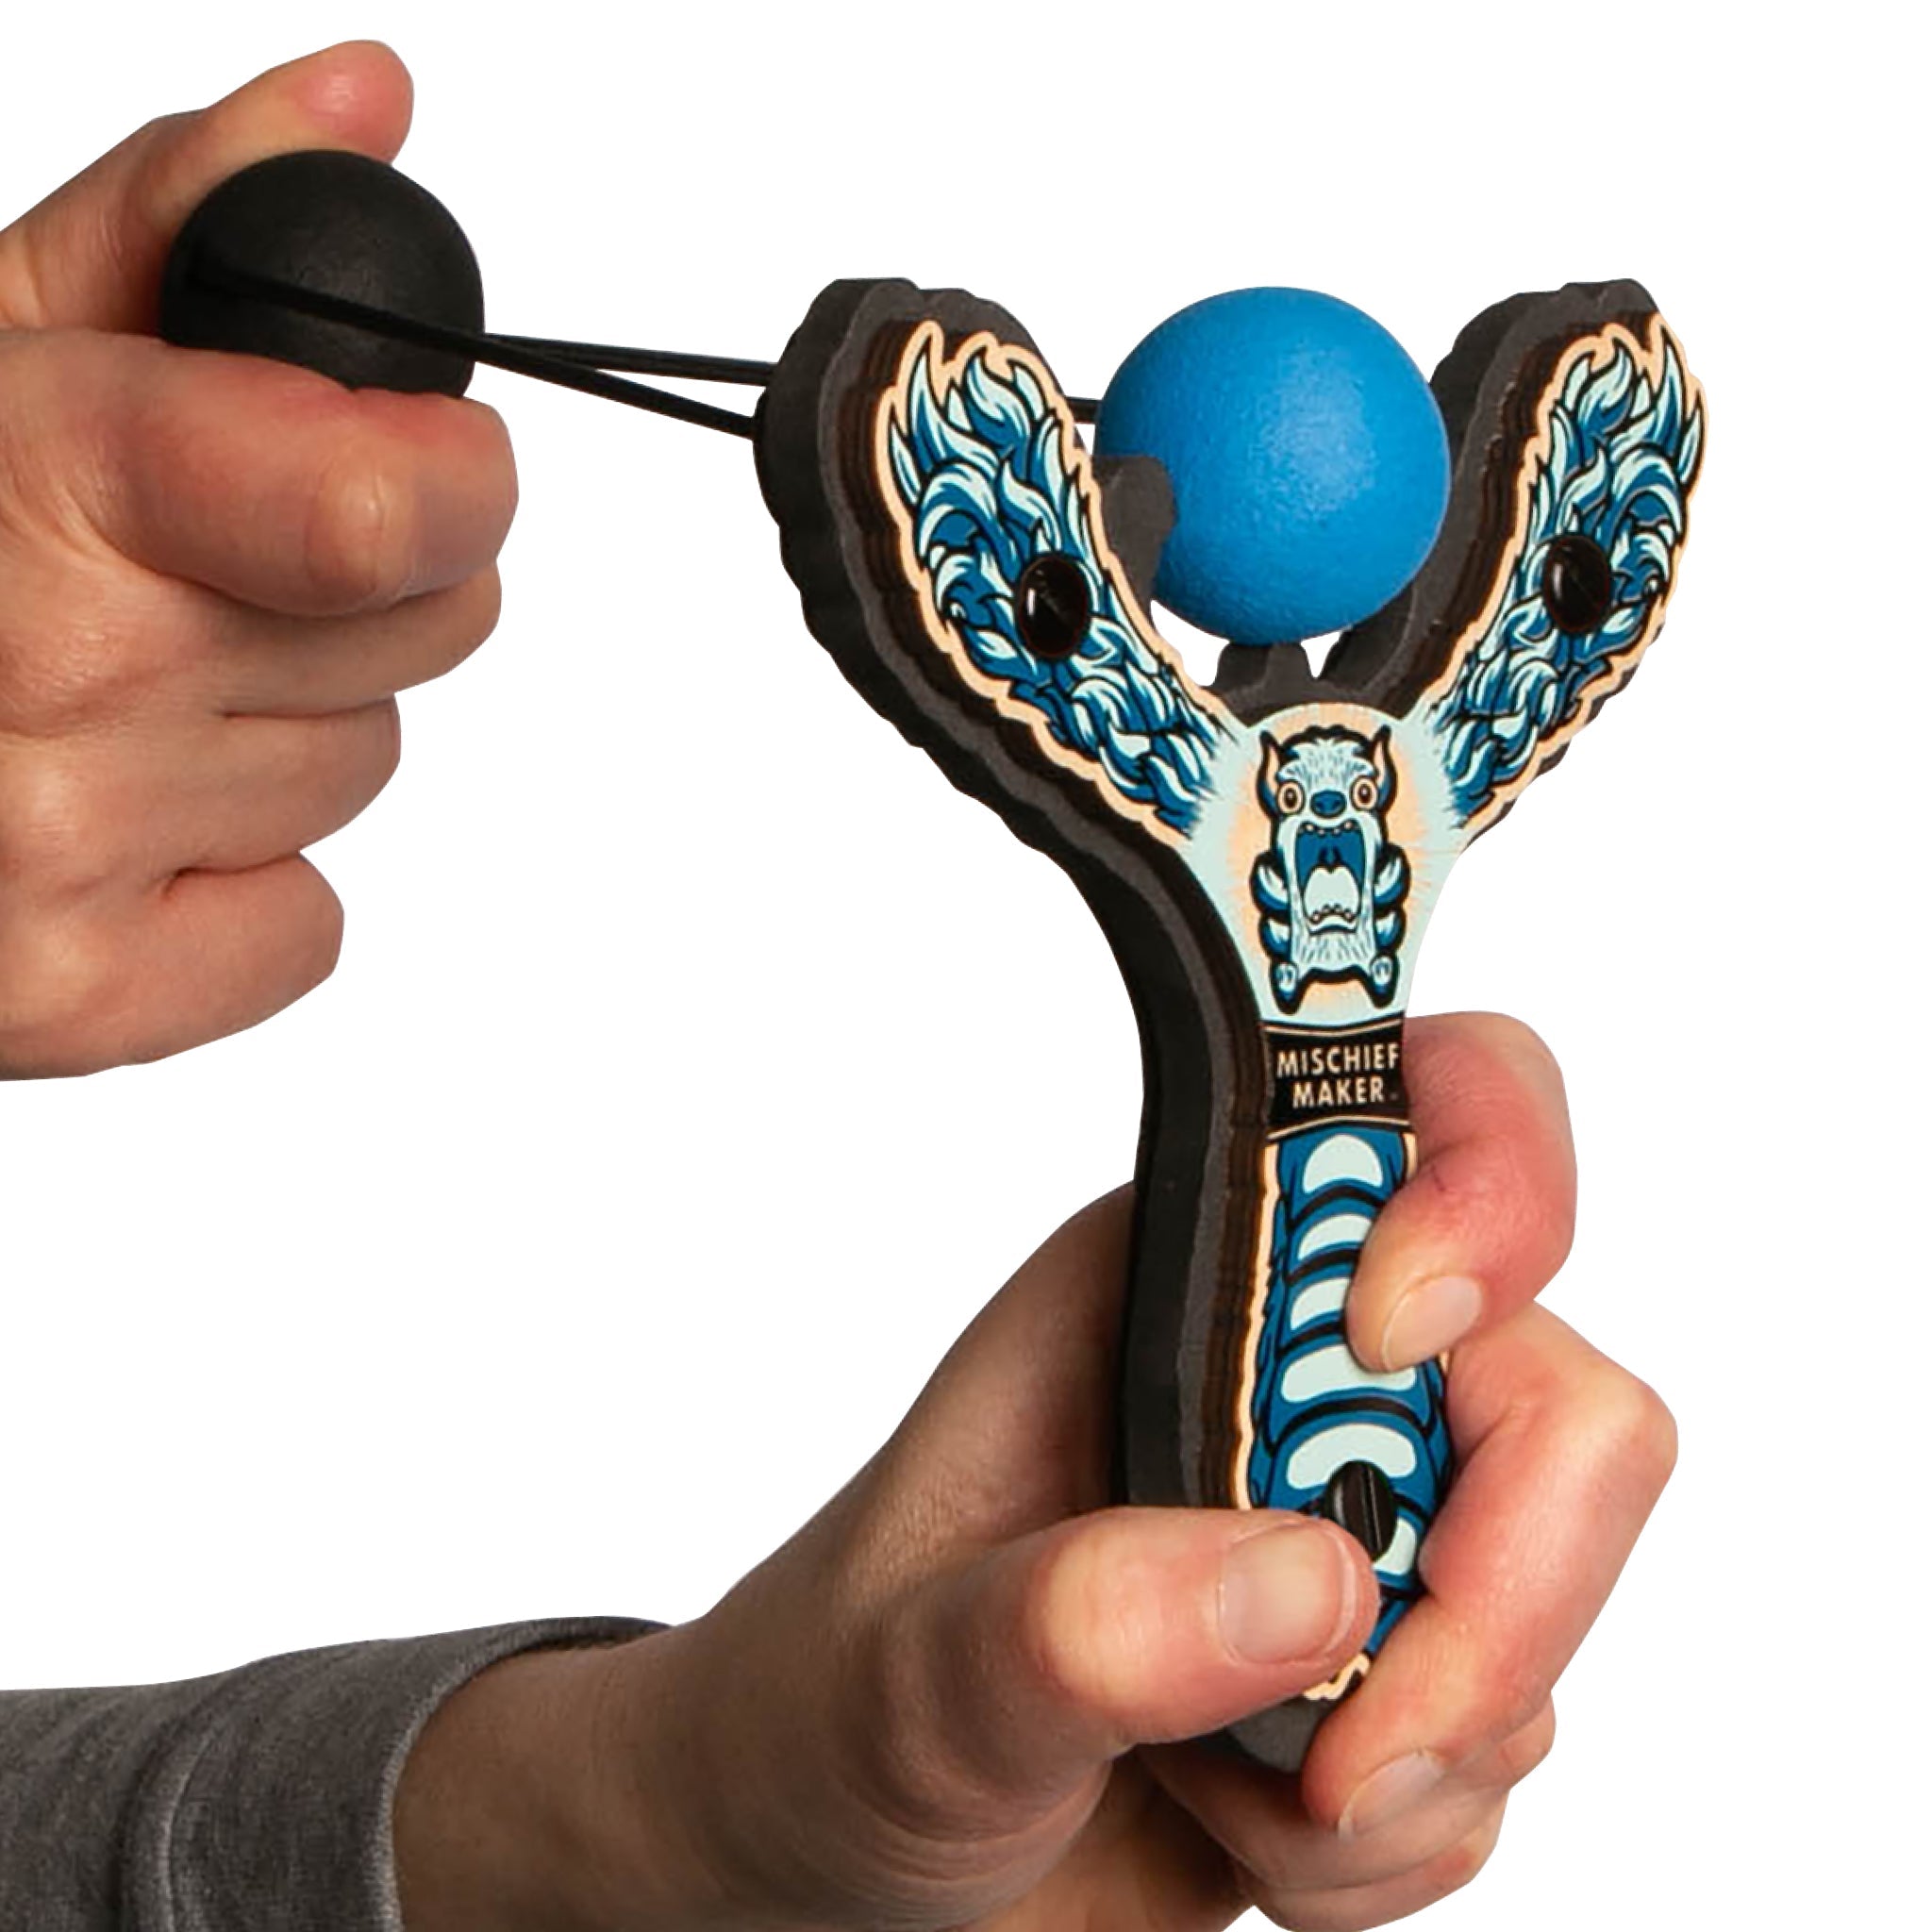 Blue Monster toy slingshot being launched. Mischief Maker by Mighty Fun!